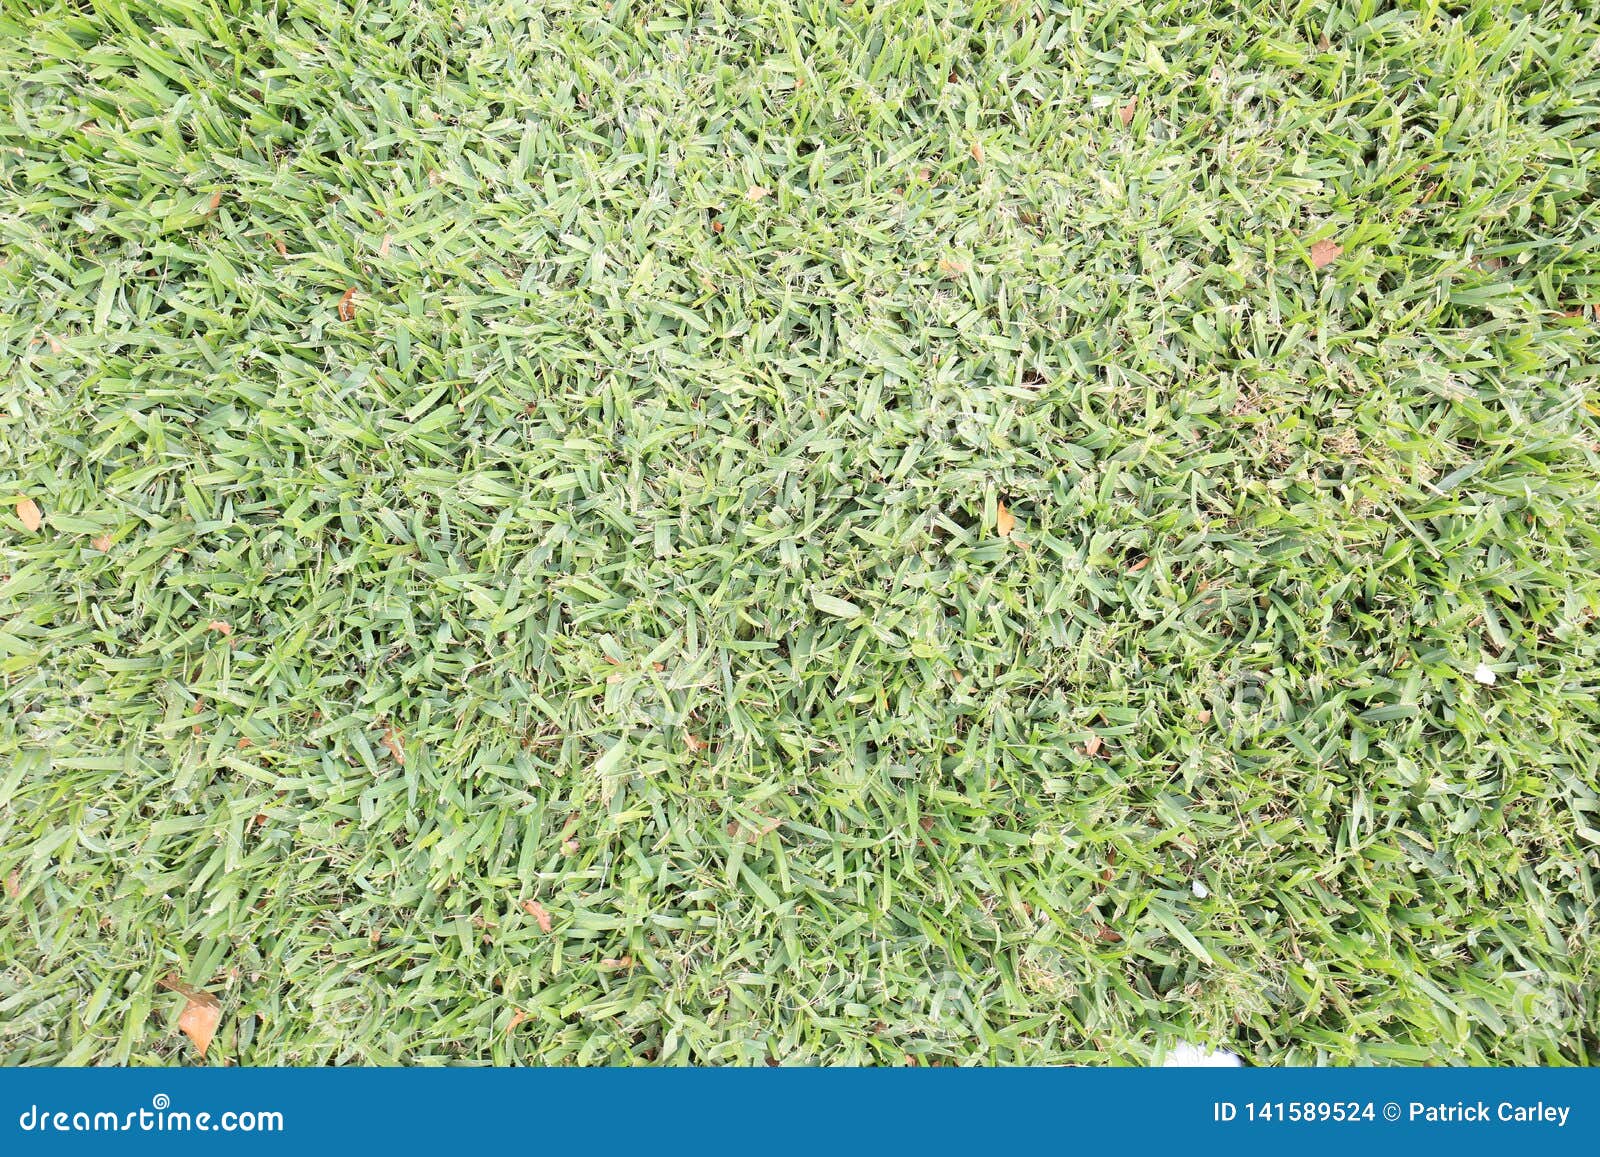 Wide Shot of Freshly Mowed Green Grass Lawn Background Stock Photo